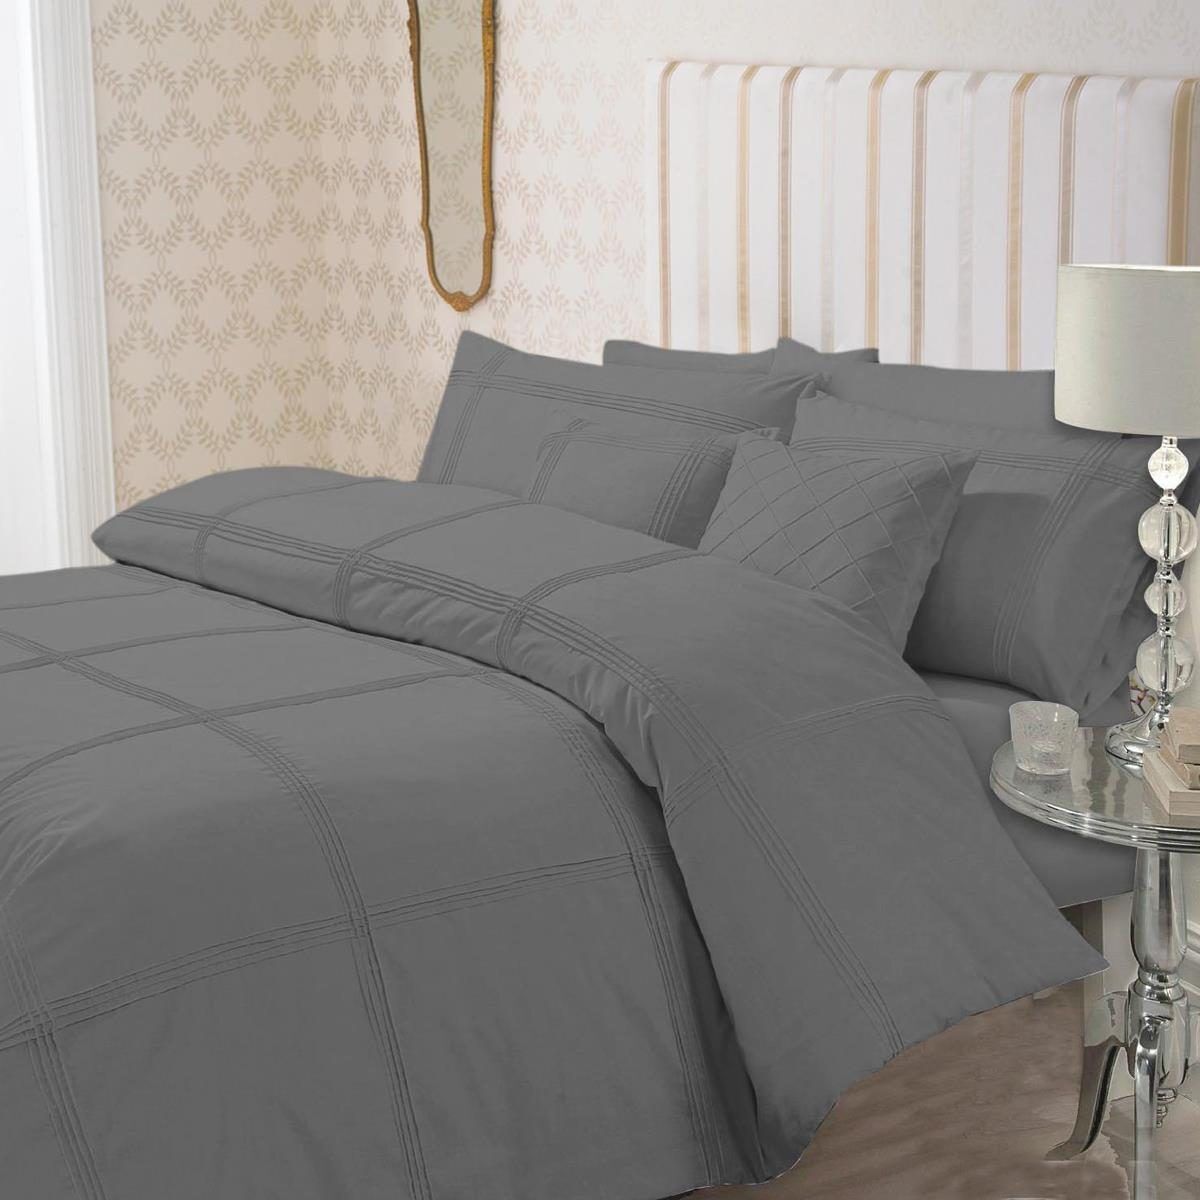 8 Pcs Dyed Pleated Grey Bed Sheet Set With Quilt Pillow And Cushions Covers Hutchpk Online 2866